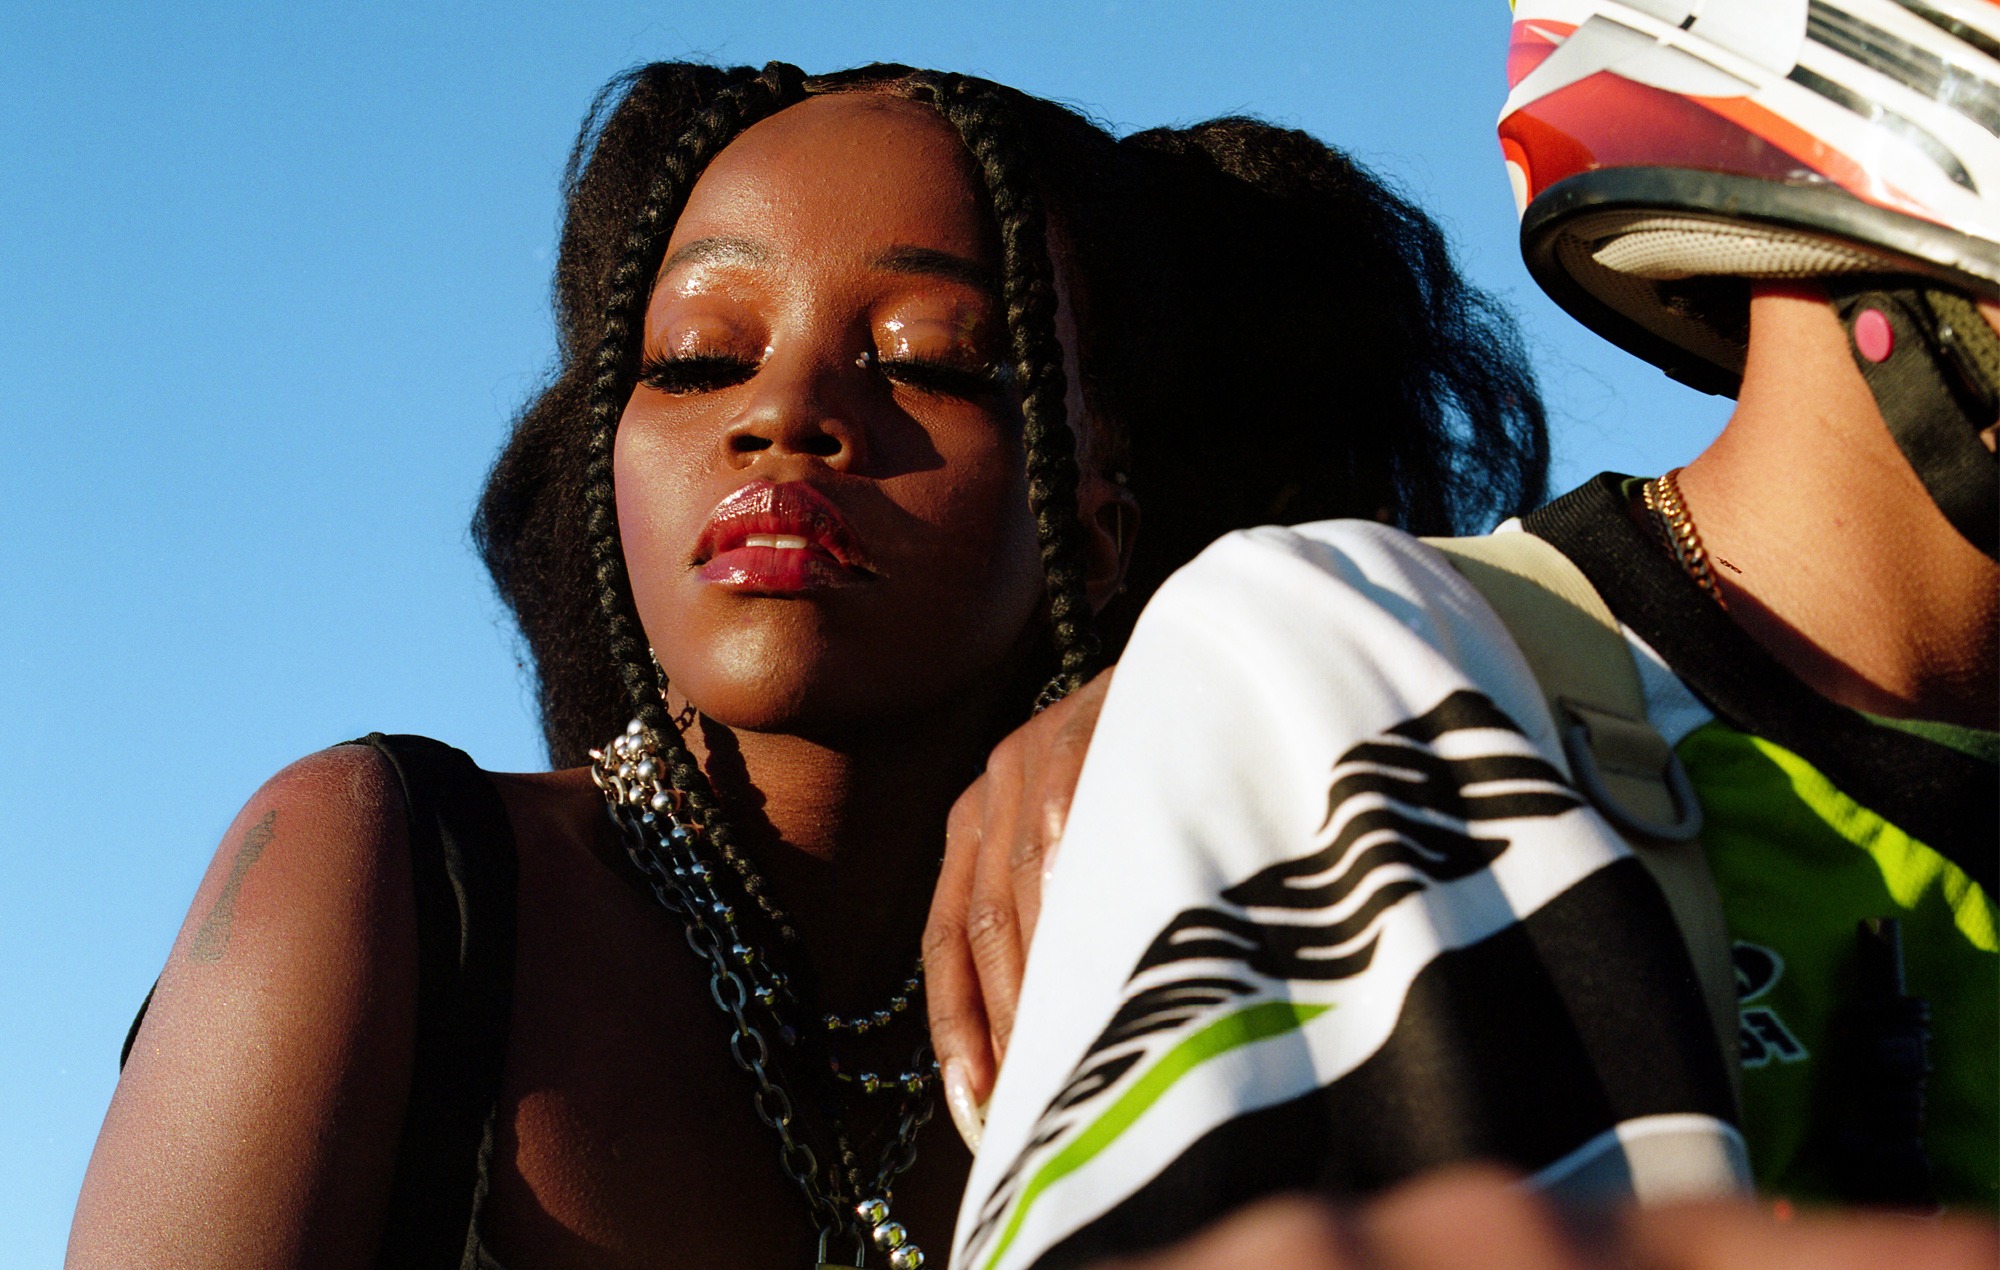 Tkay Maidza on her infectious new single, ‘Shook’: “I’m starting to feel more confident in my skills”